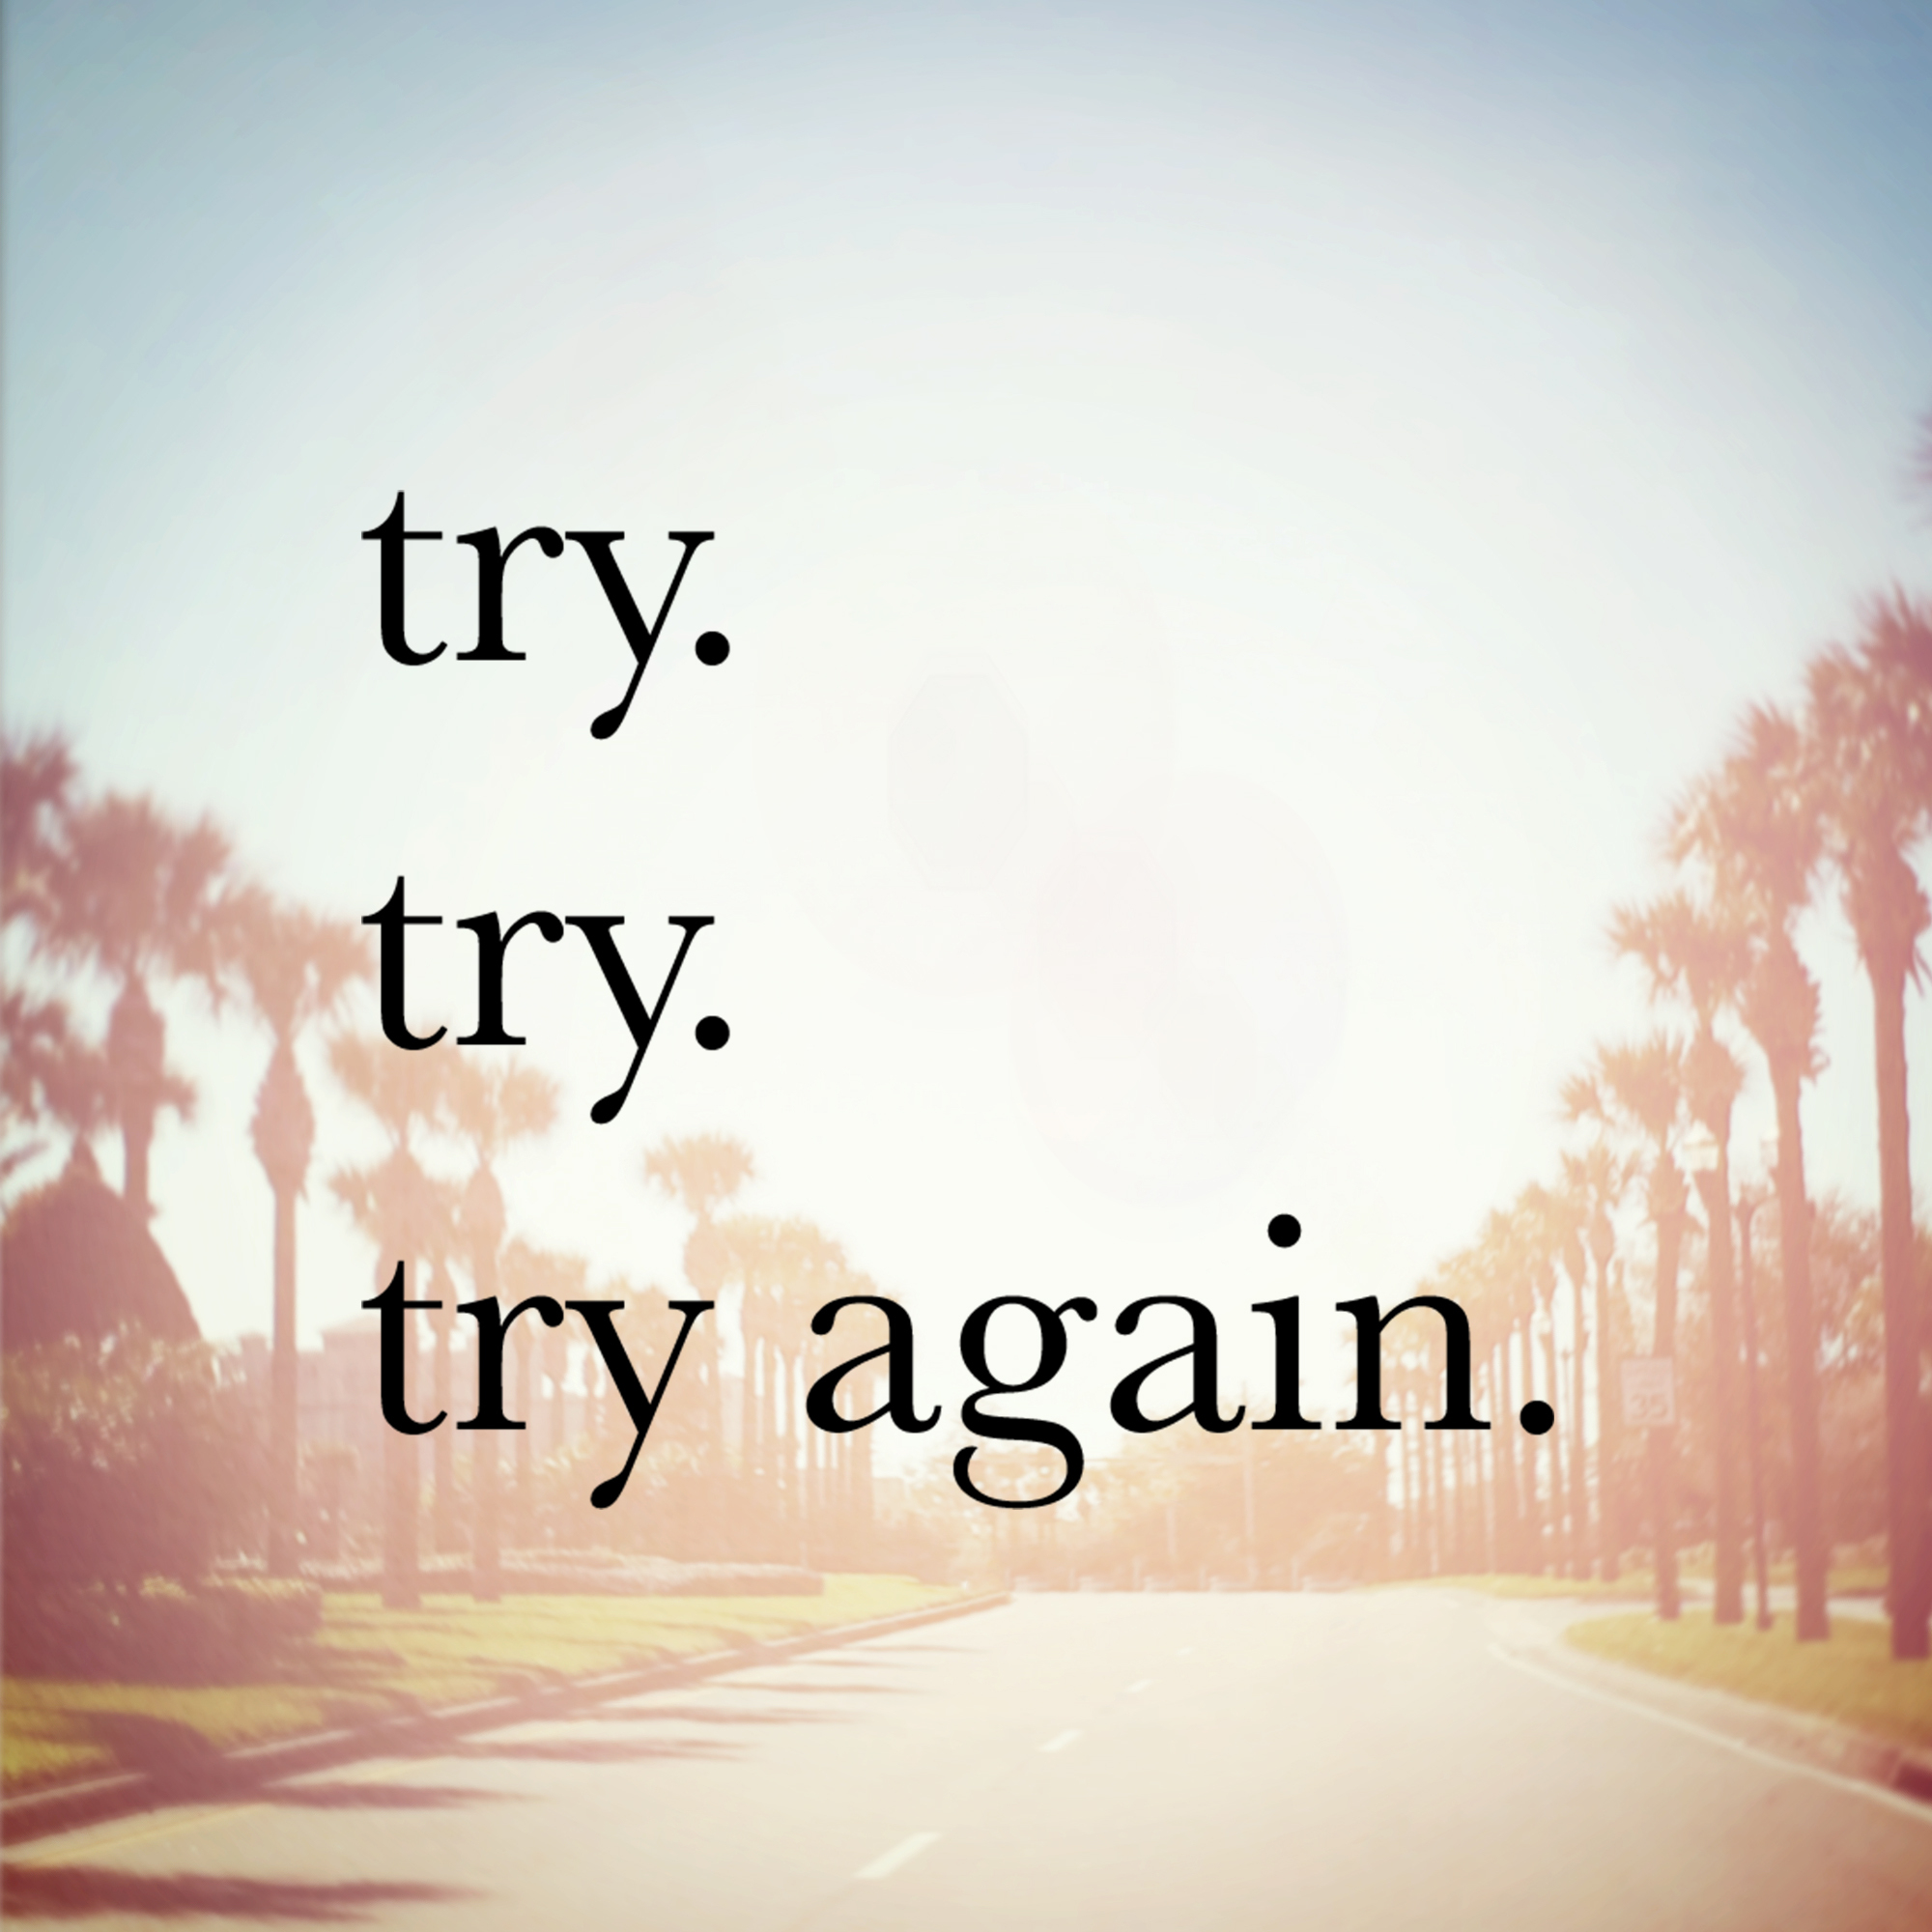 Try one's best. Картинка try again. Try again МО. Try again топ картинки. Try again again trend текст.